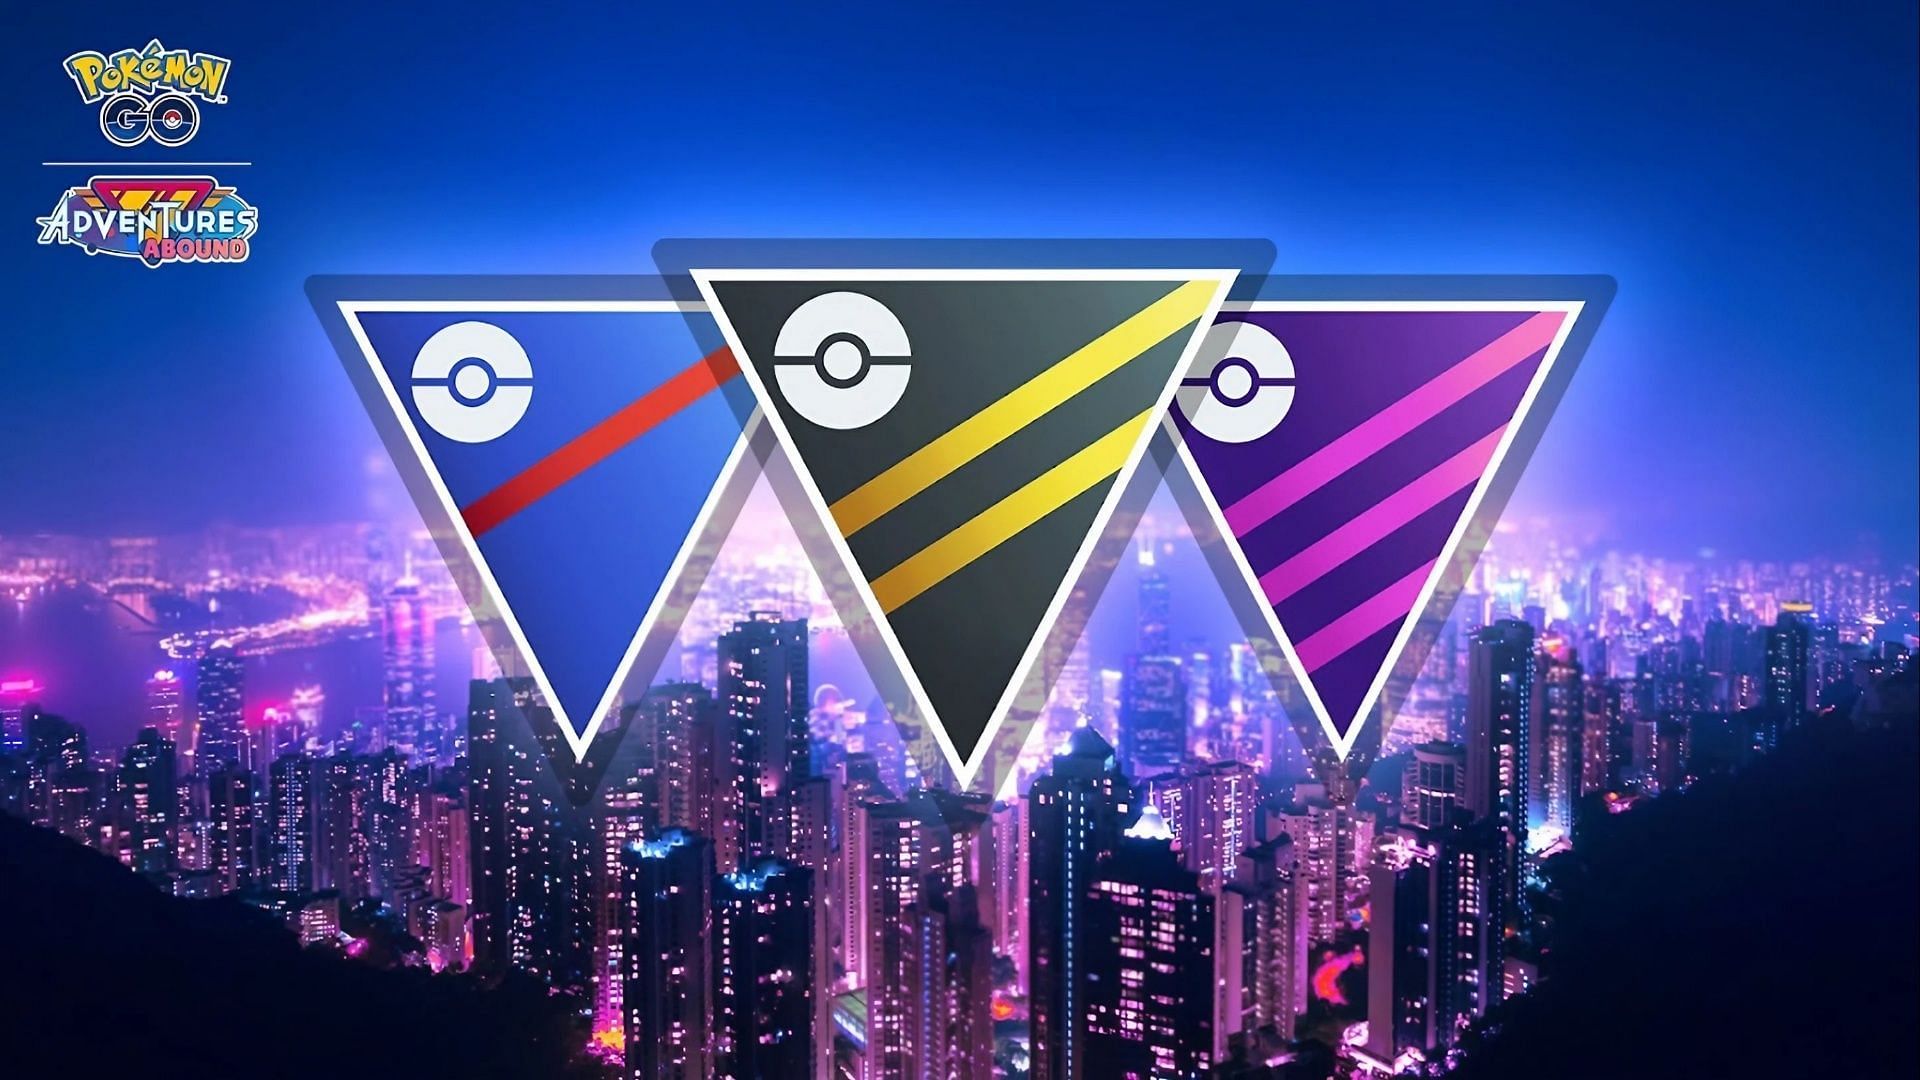 The GO Battle League for Adventures Abound has been revealed (Image via Pokemon GO)